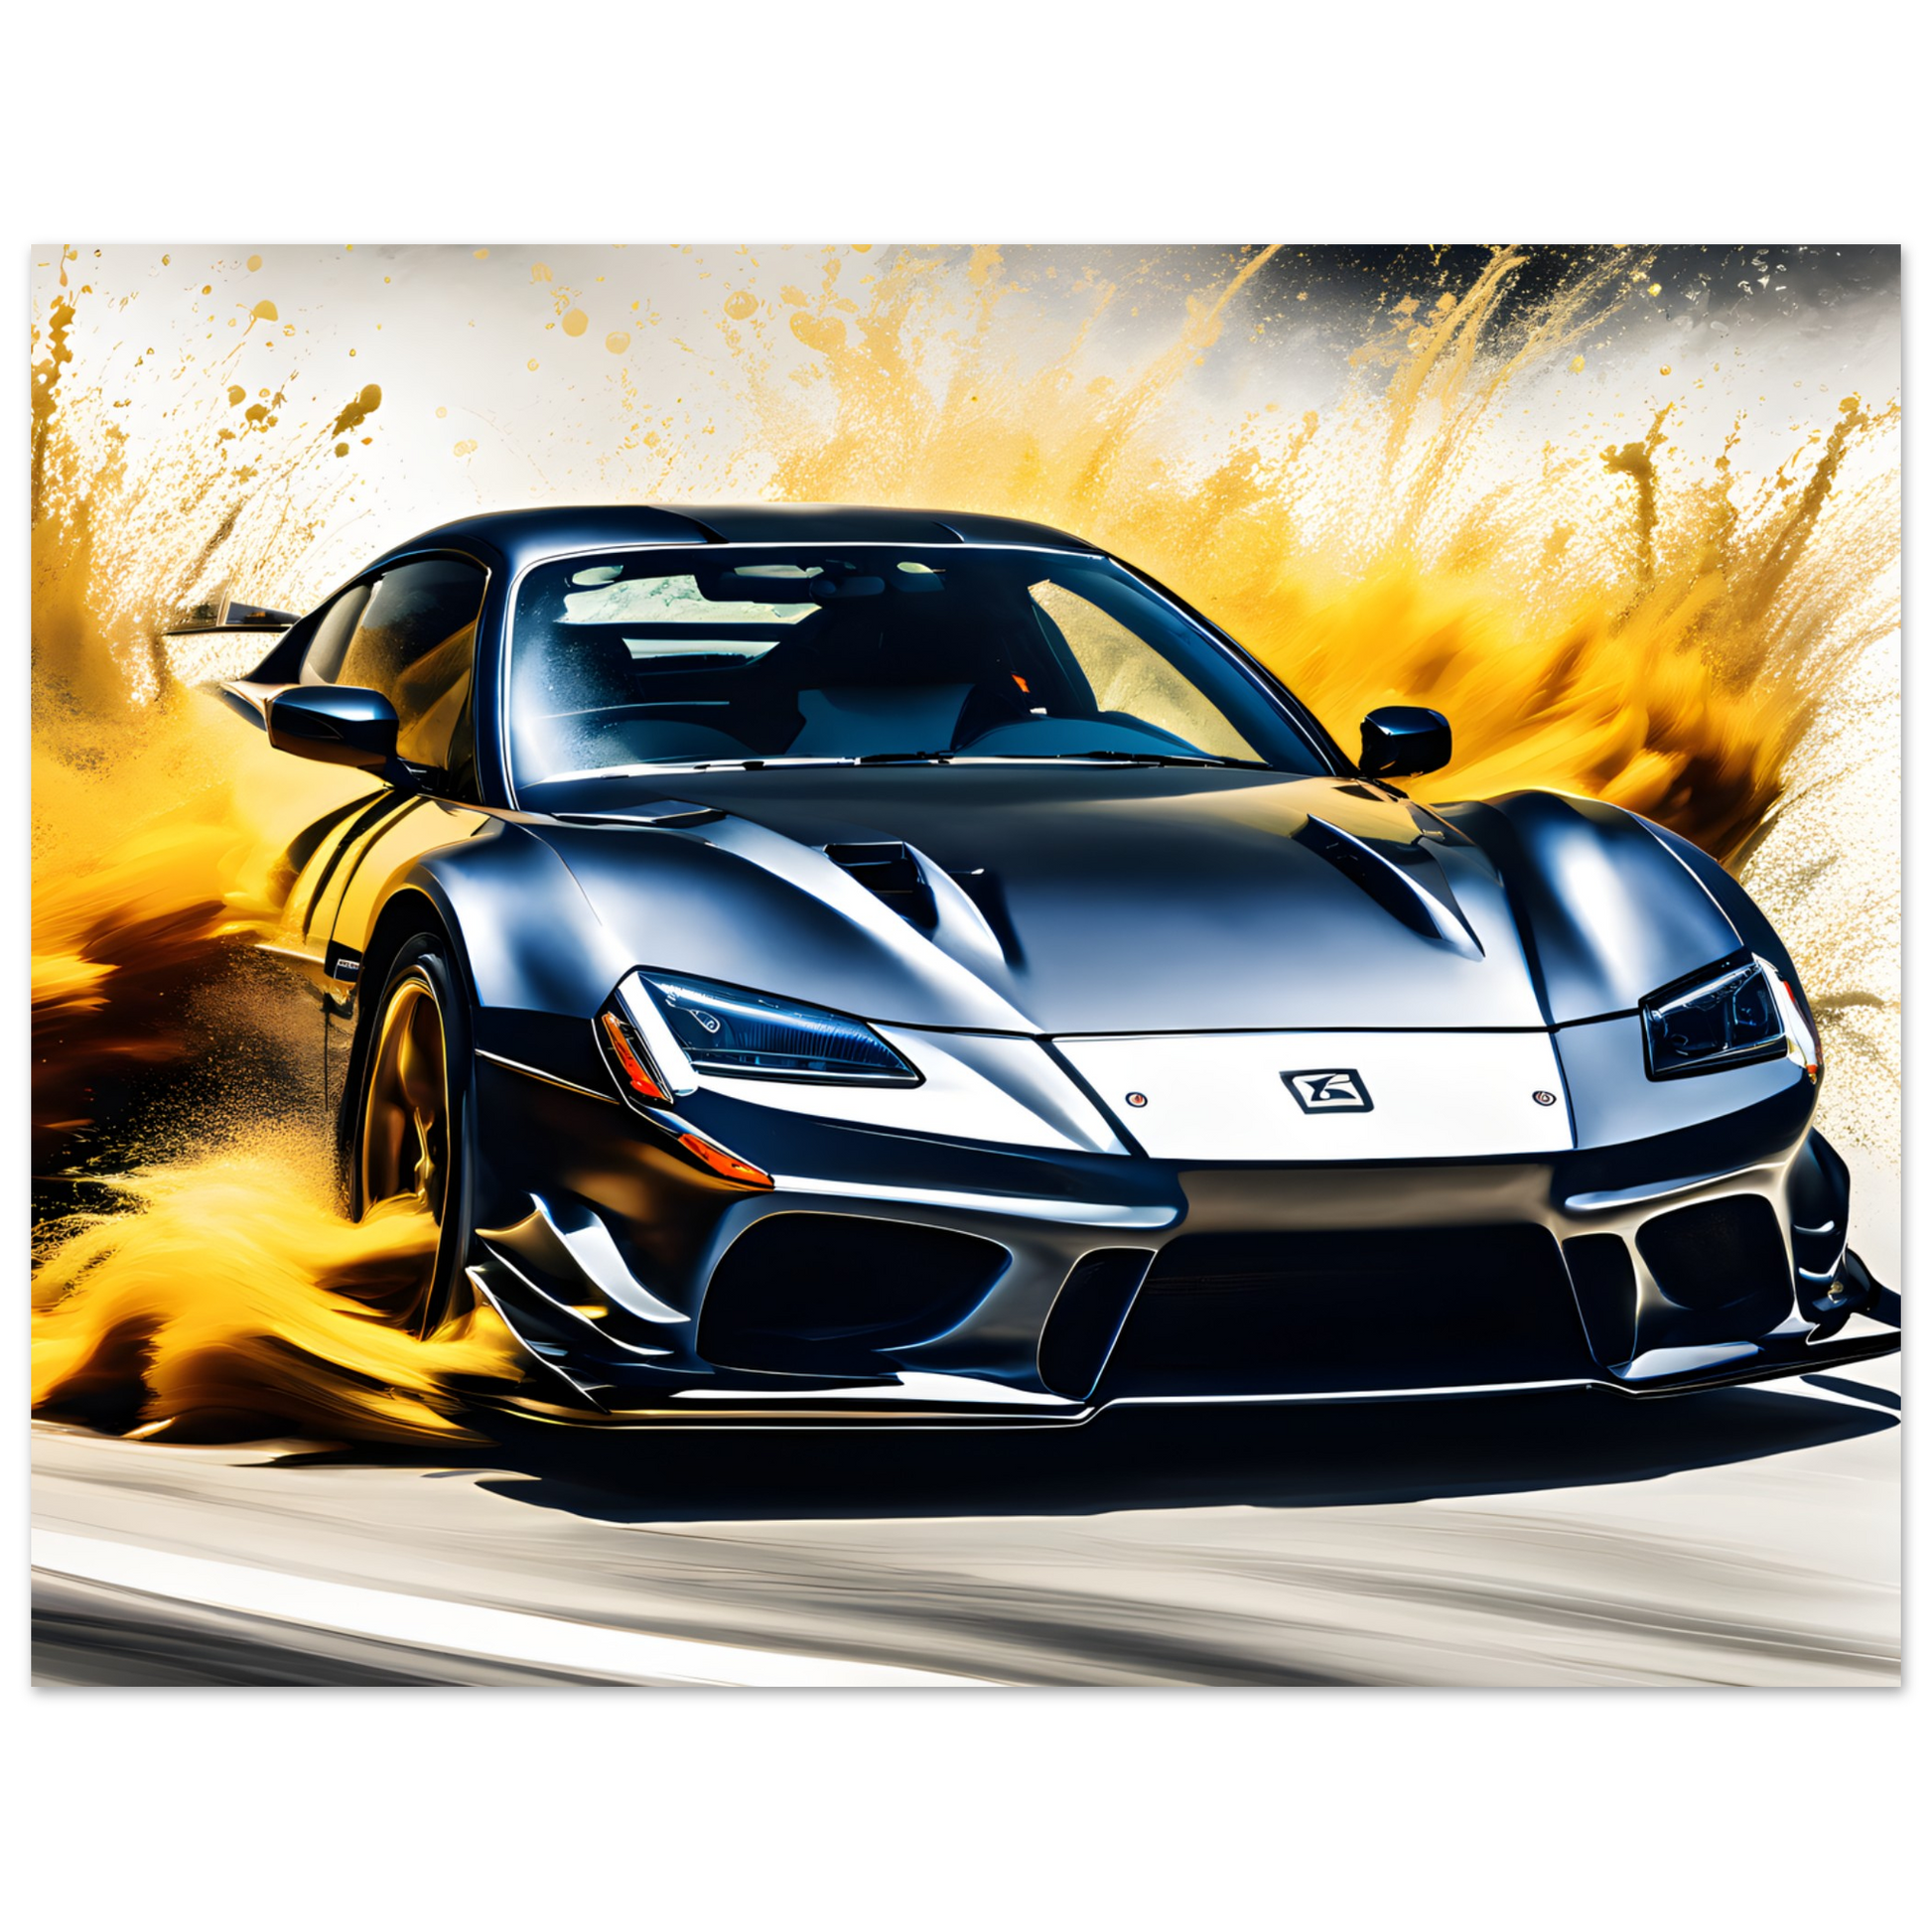 Silver Sports Car Poster